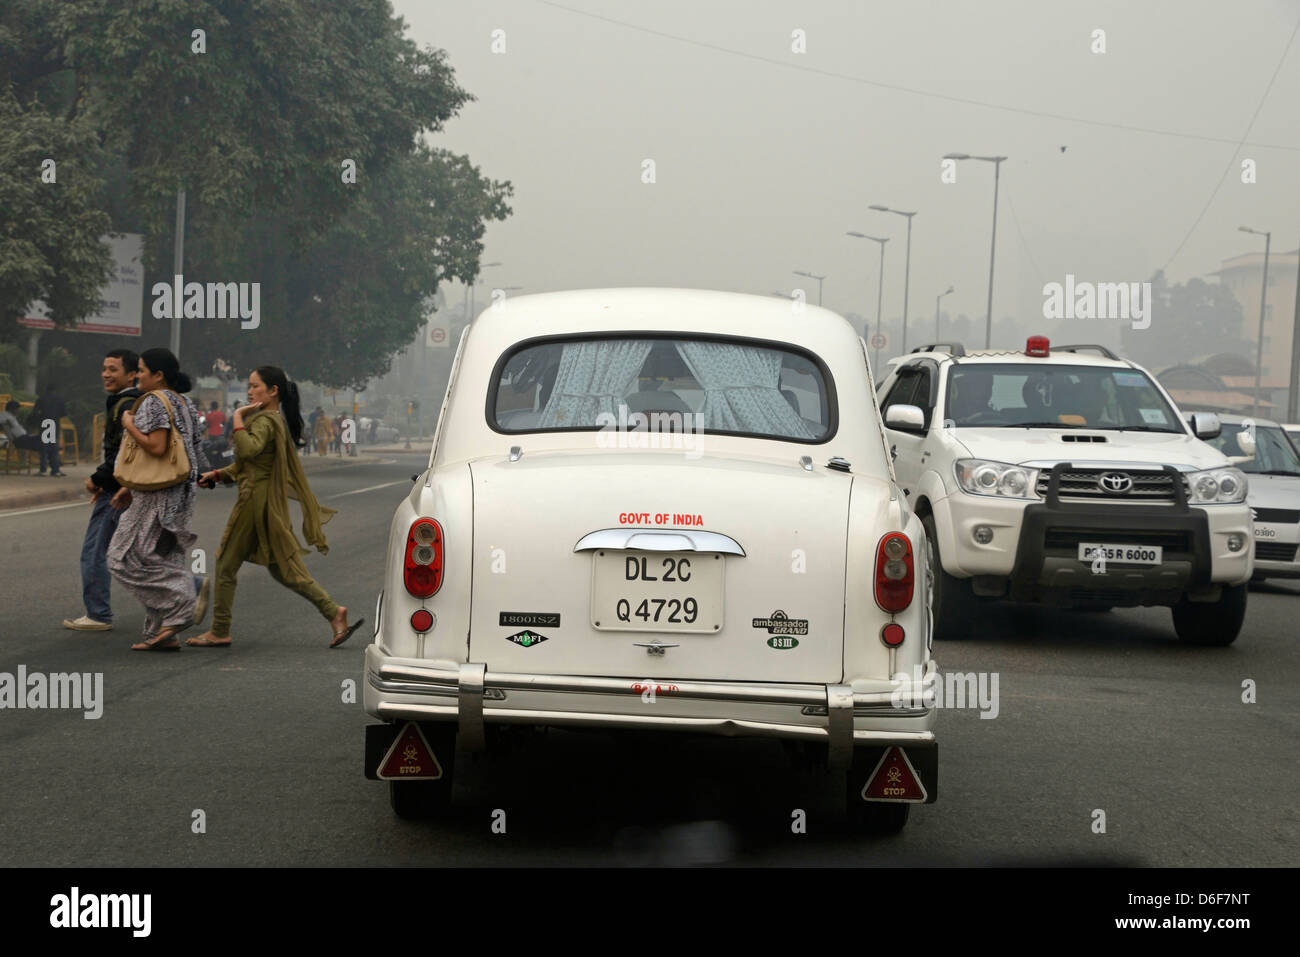 An Ambassador car owned by the Indian Government in New Delhi, India Stock Photo